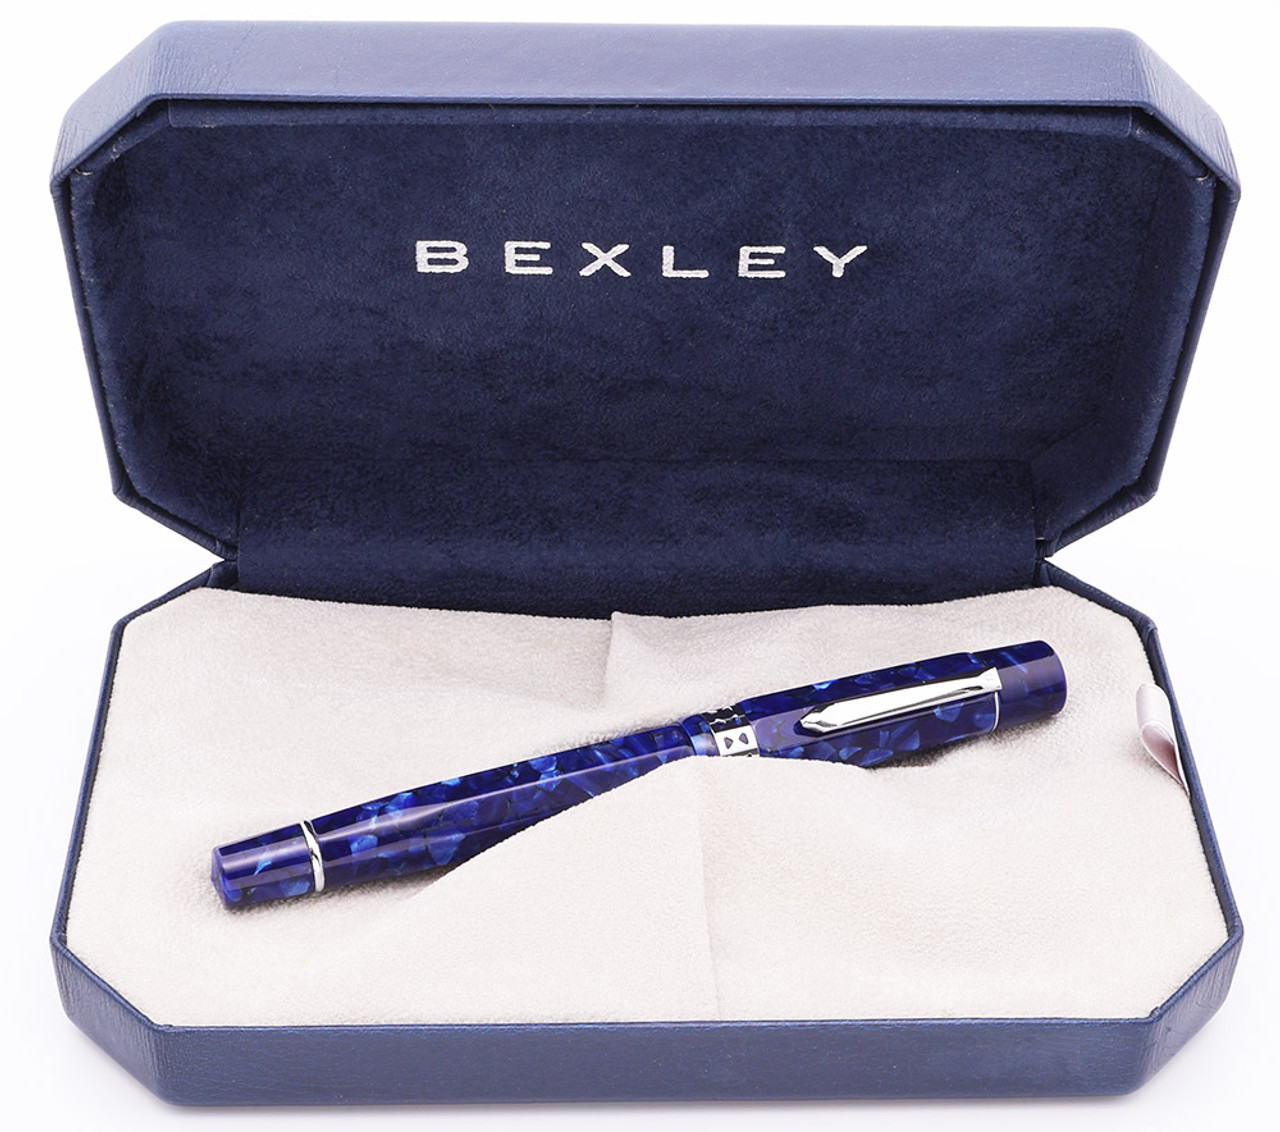 Bexley Americana Fountain Pen Limited Edition (2002) - Sanibel Blue Faceted, C/C, 18k Medium Two-Tone Nib (Excellent in Box, Works Well)